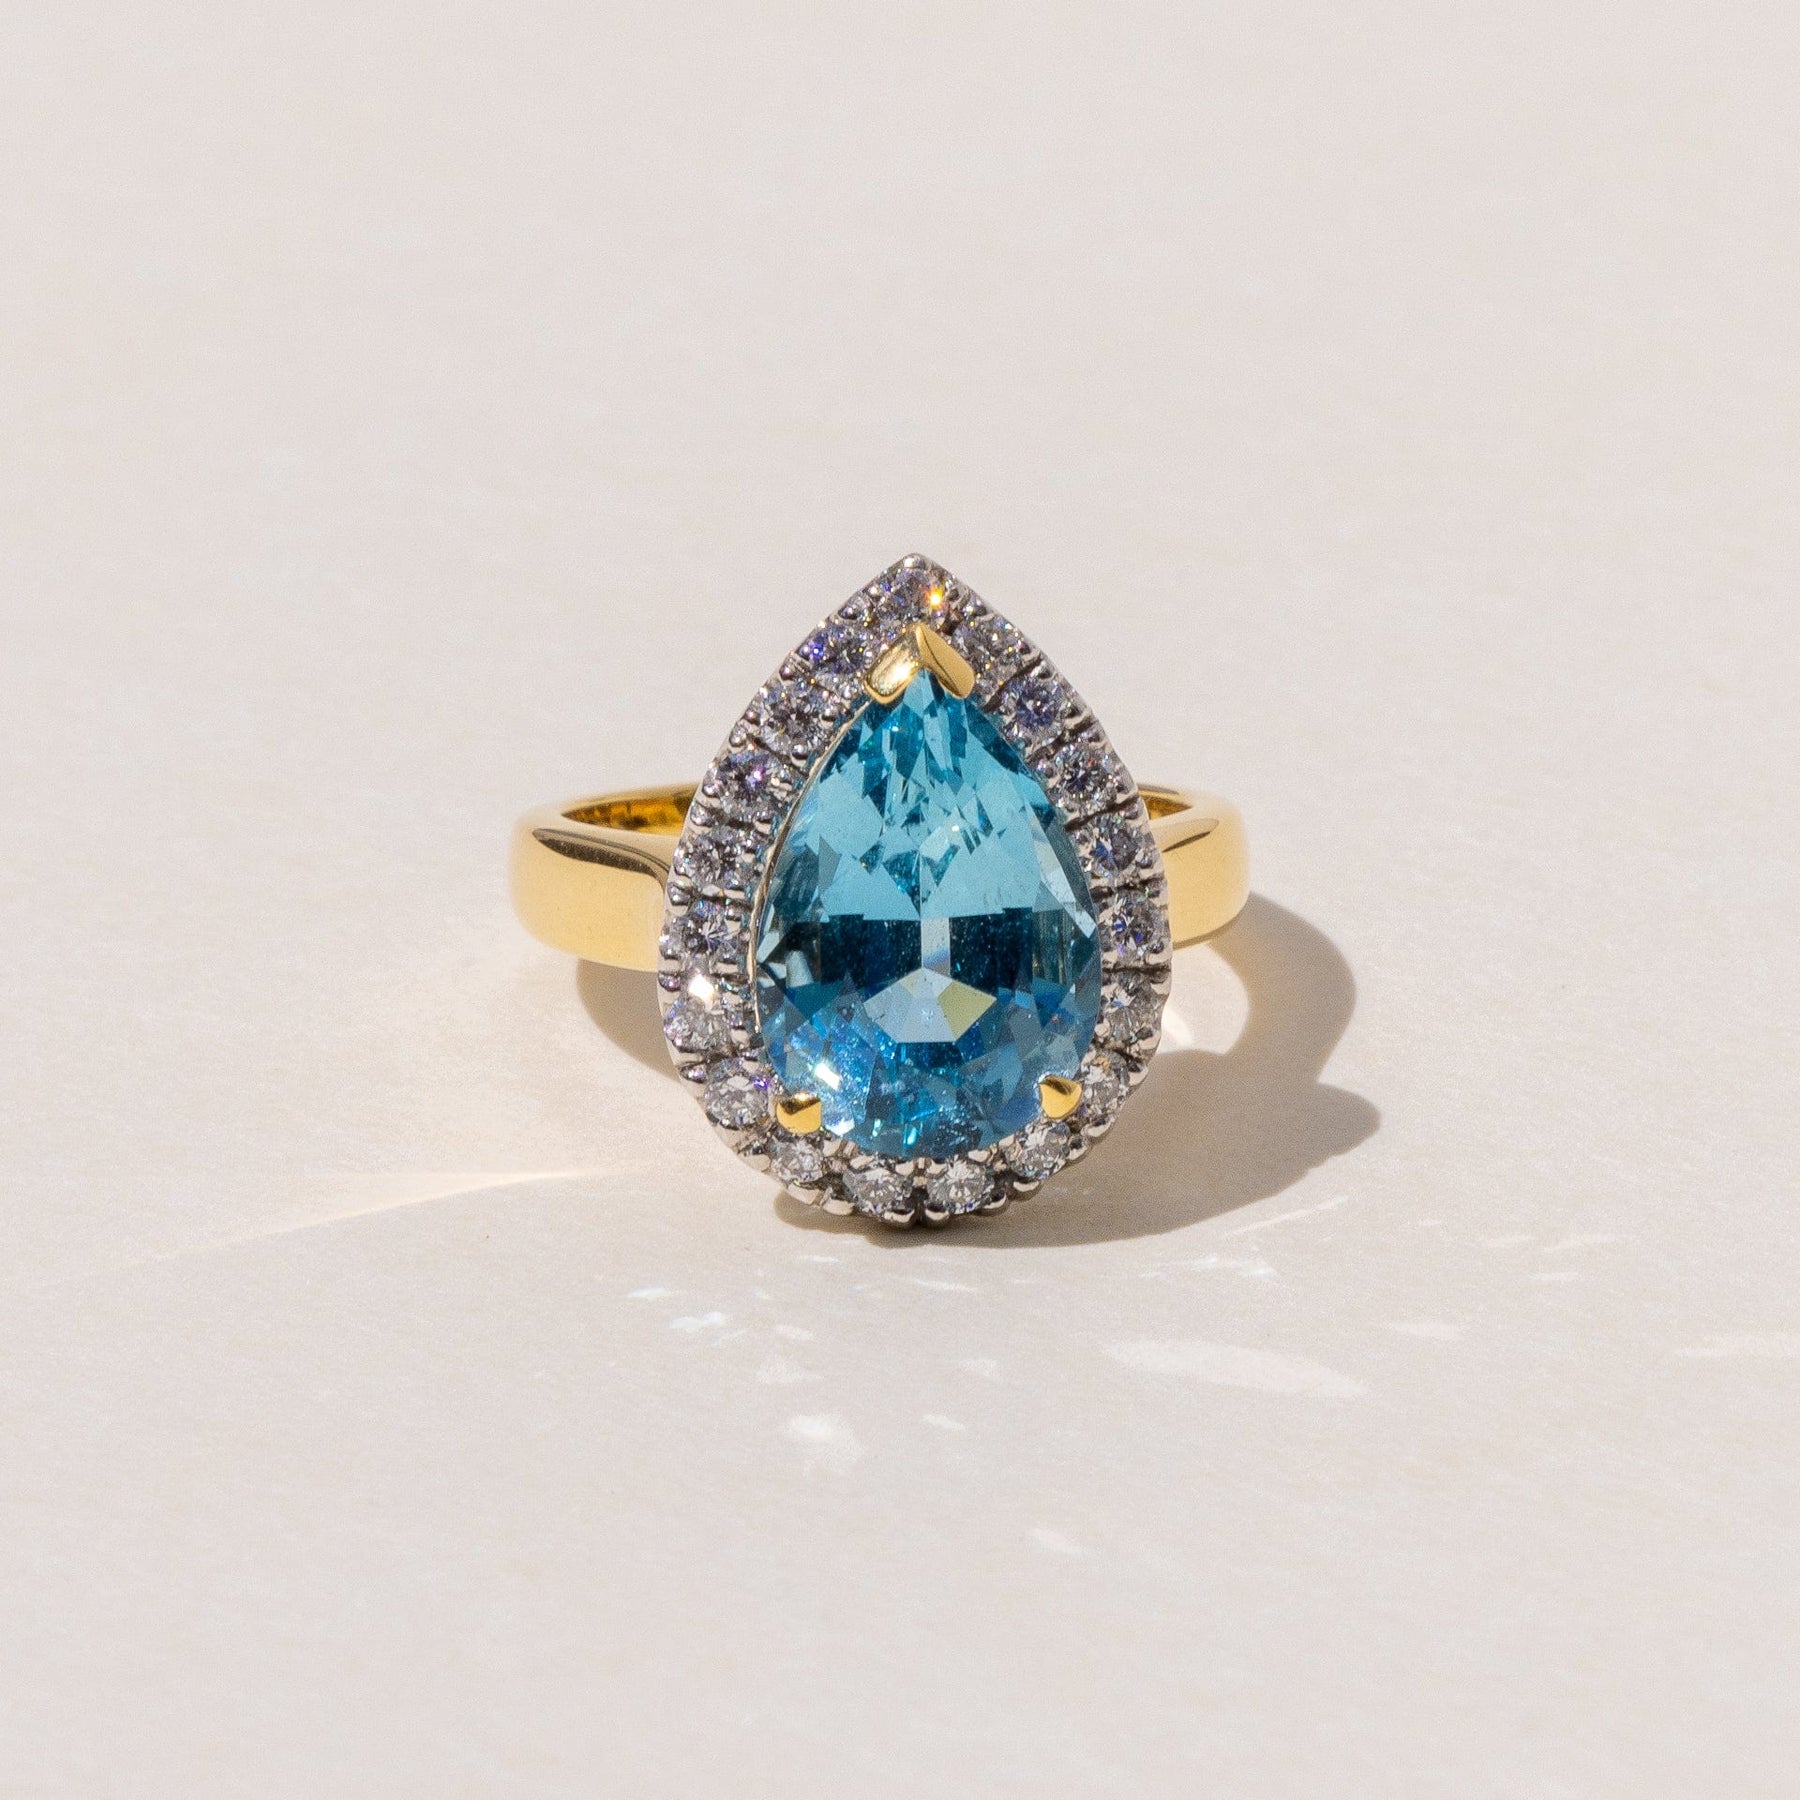 Handcrafted Large Aquamarine Cocktail Ring in 18ct Yellow Gold 